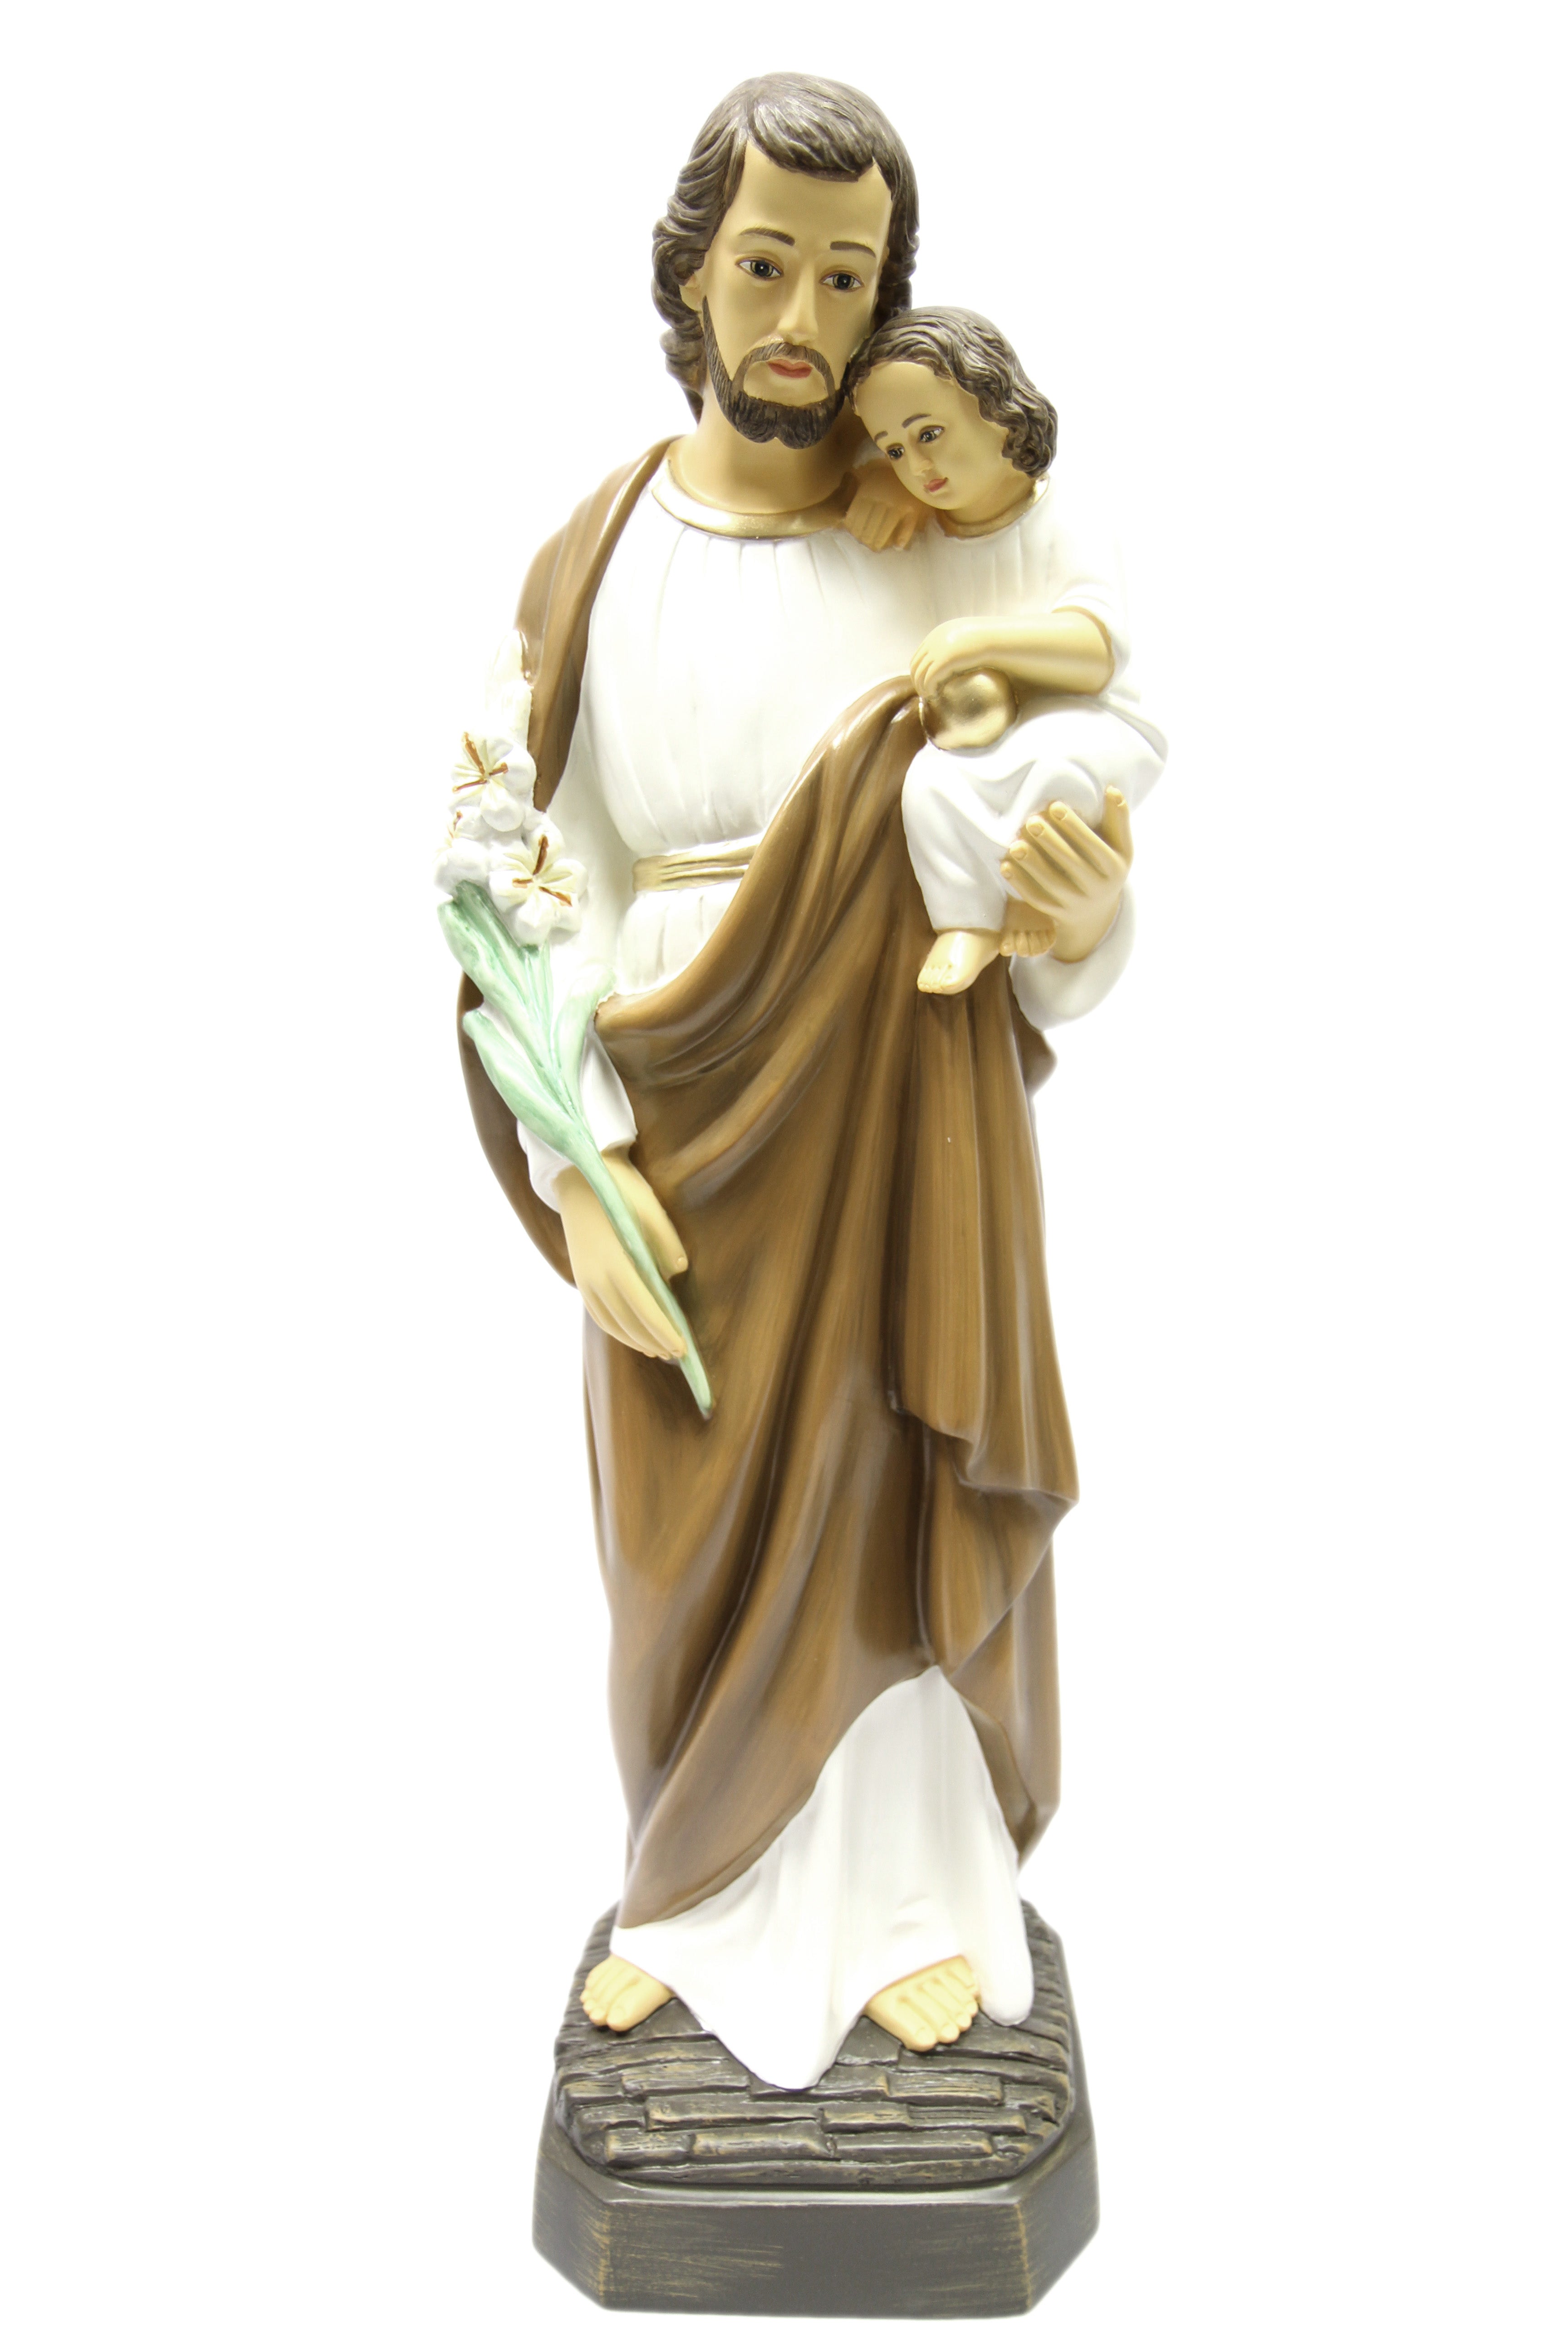 27 Inch Saint Joseph with Baby Jesus Catholic Religious Statue Vittoria Collection Made in Italy